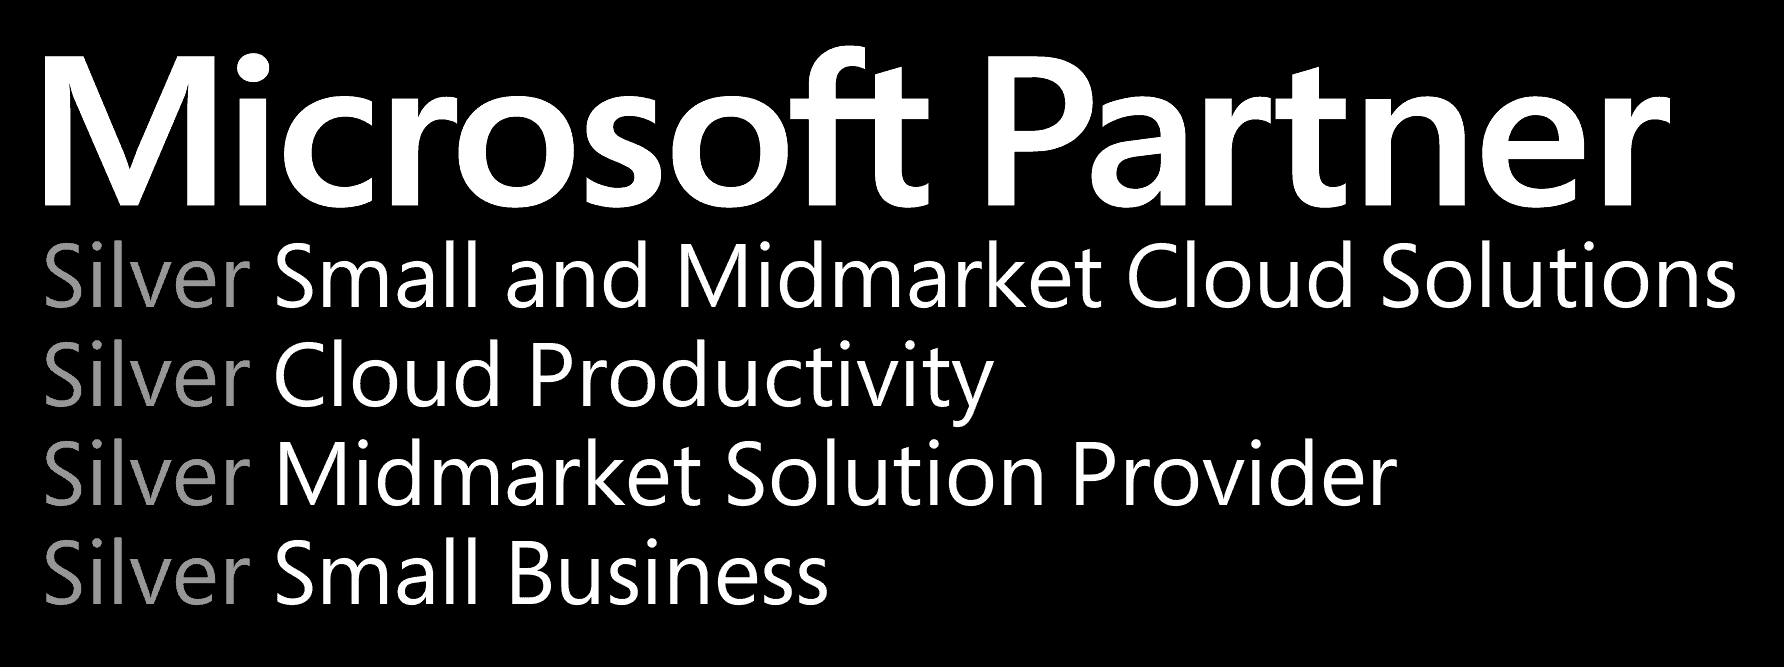 Microsoft Partner Silver Small and Midmarket Cloud Solutions Silver Cloud Productivity Silver Midmarket Solution Provider Silver Small Business